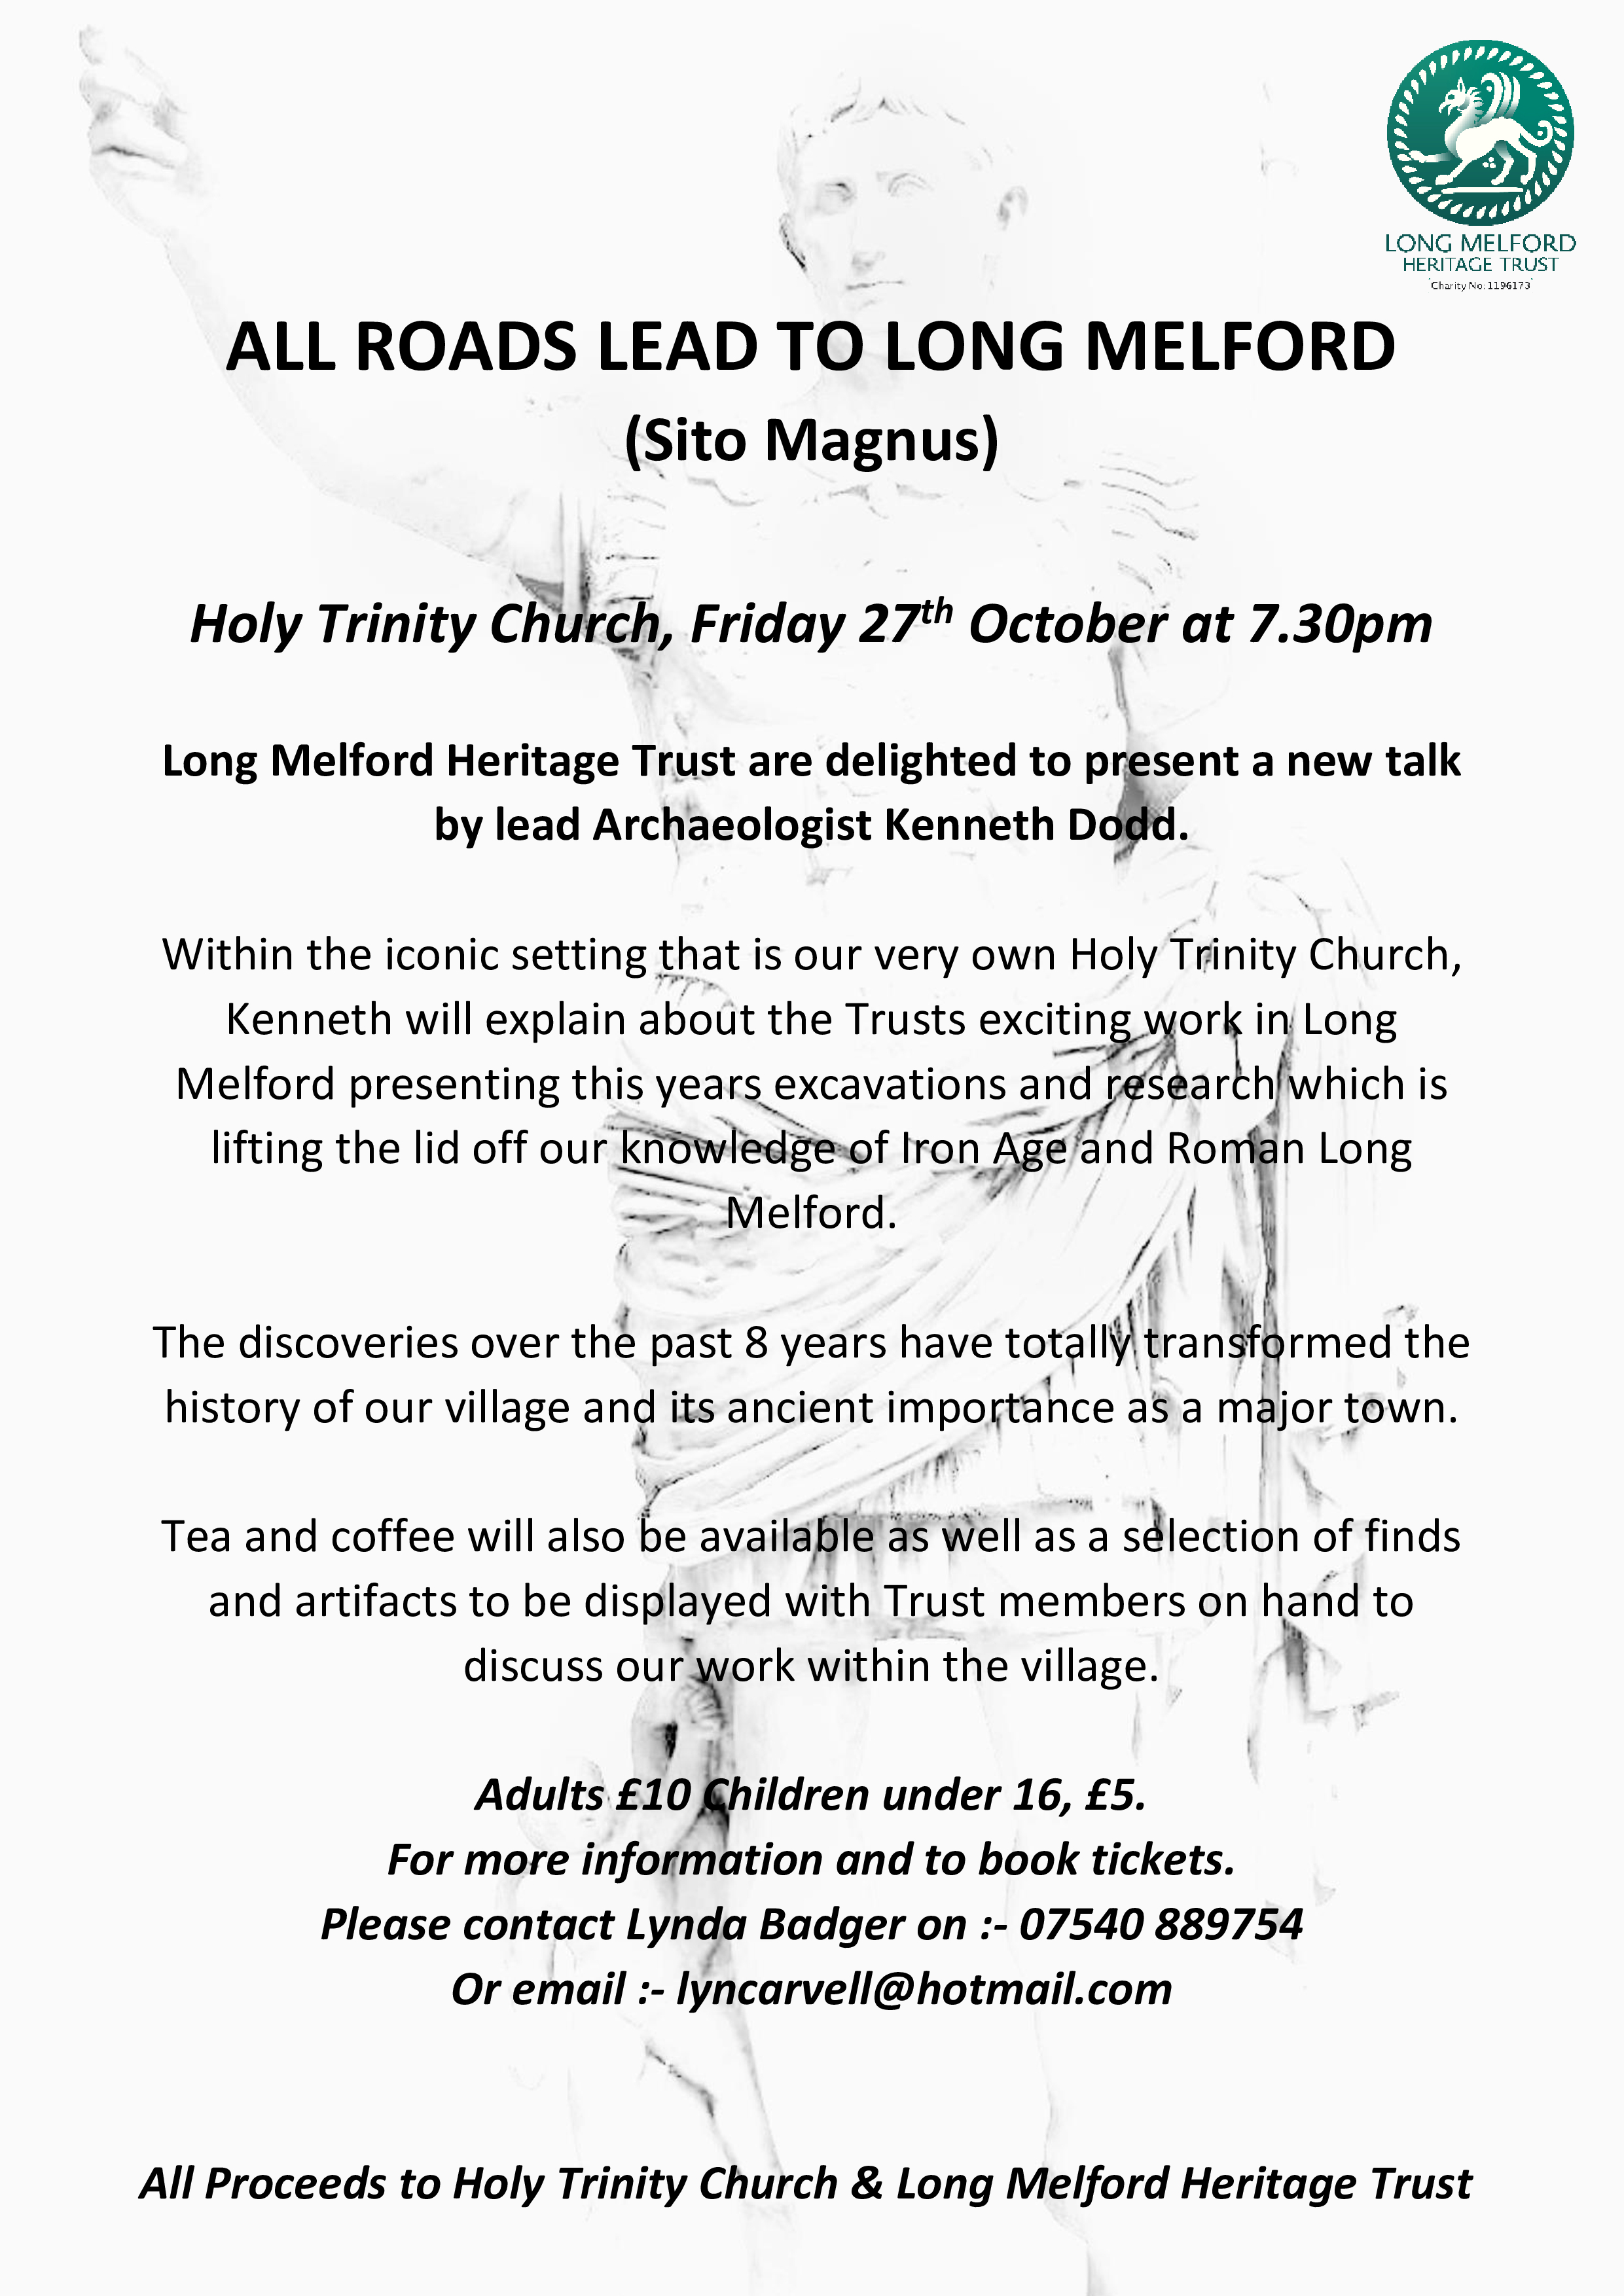 ALL ROADS LEAD TO LONG MELFORD new version